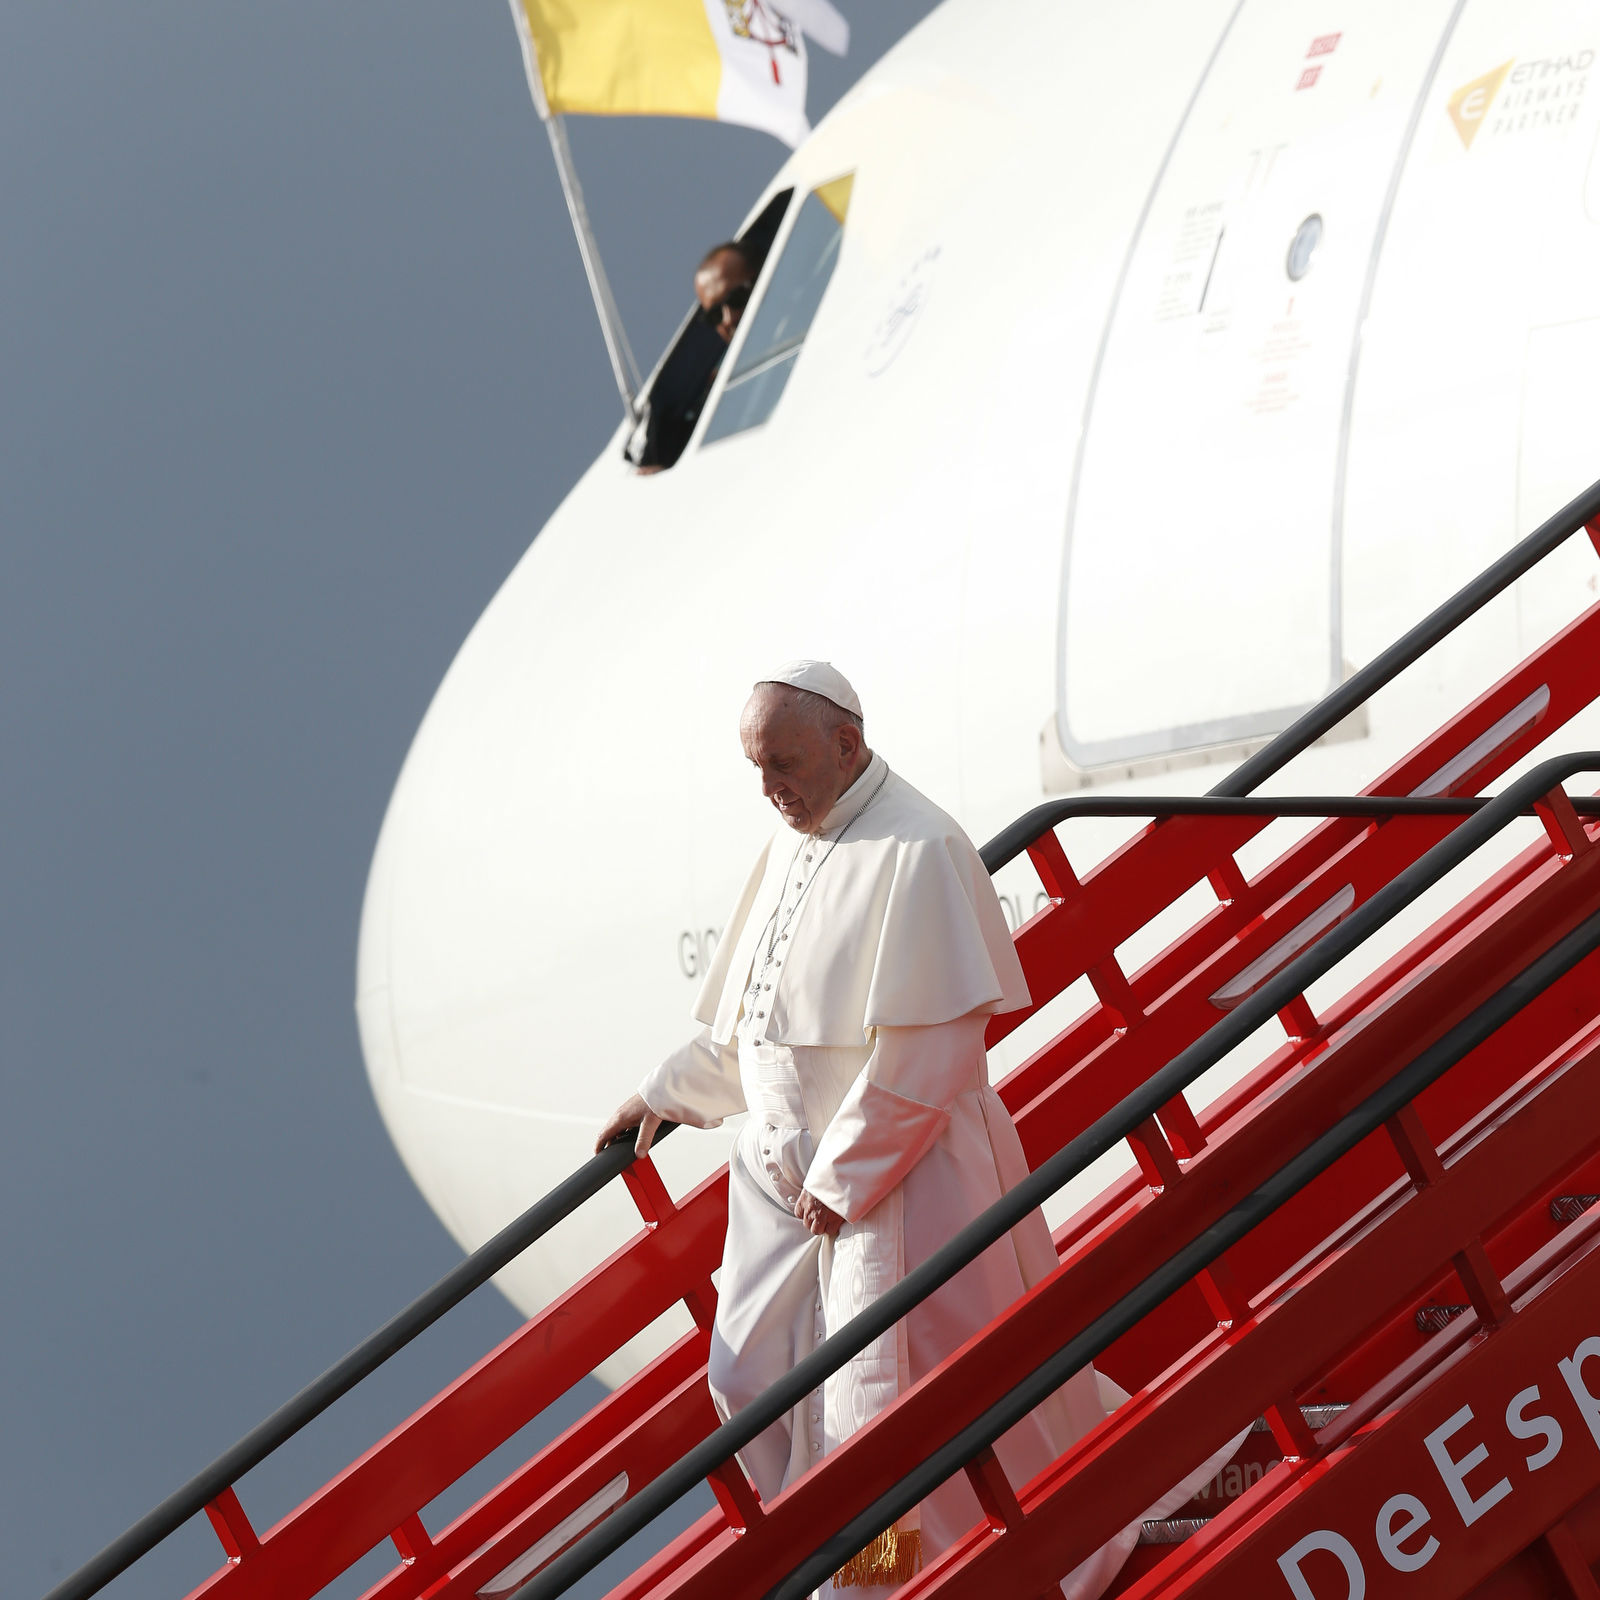 Pope arrives to help promote healing in Colombia, scarred by war